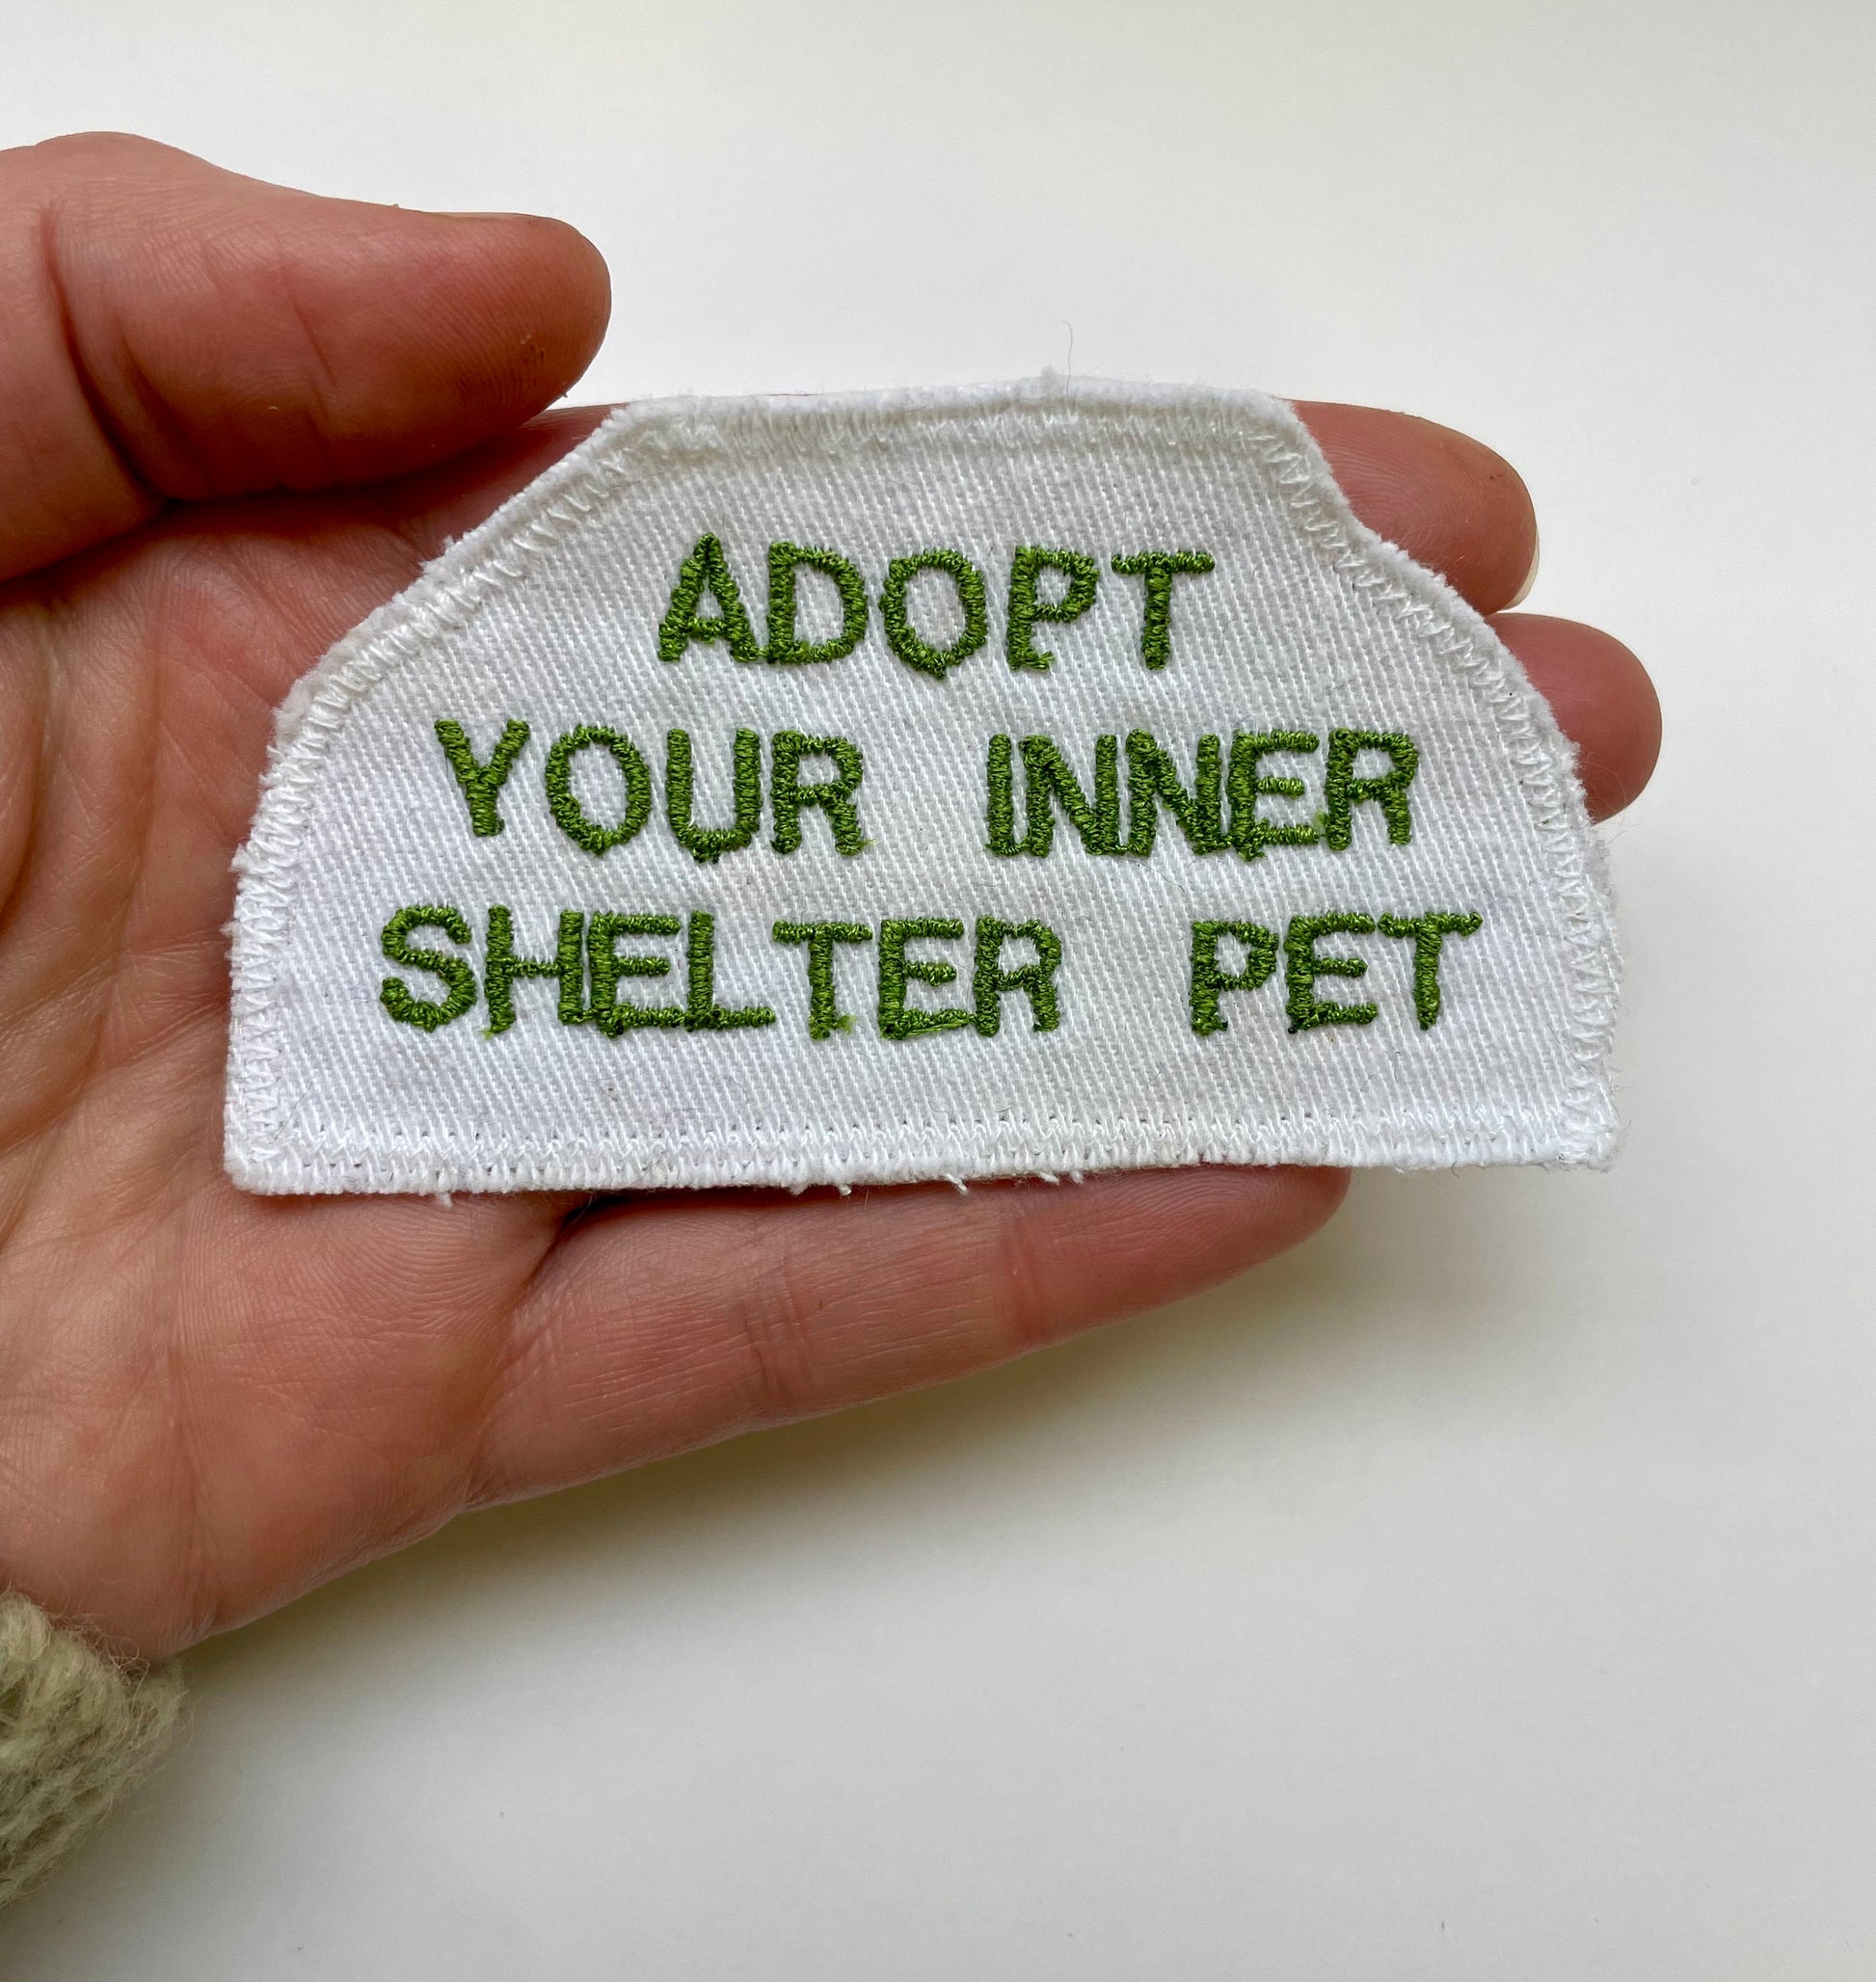 a hand holding a patch that says adopt your inner shelter pet